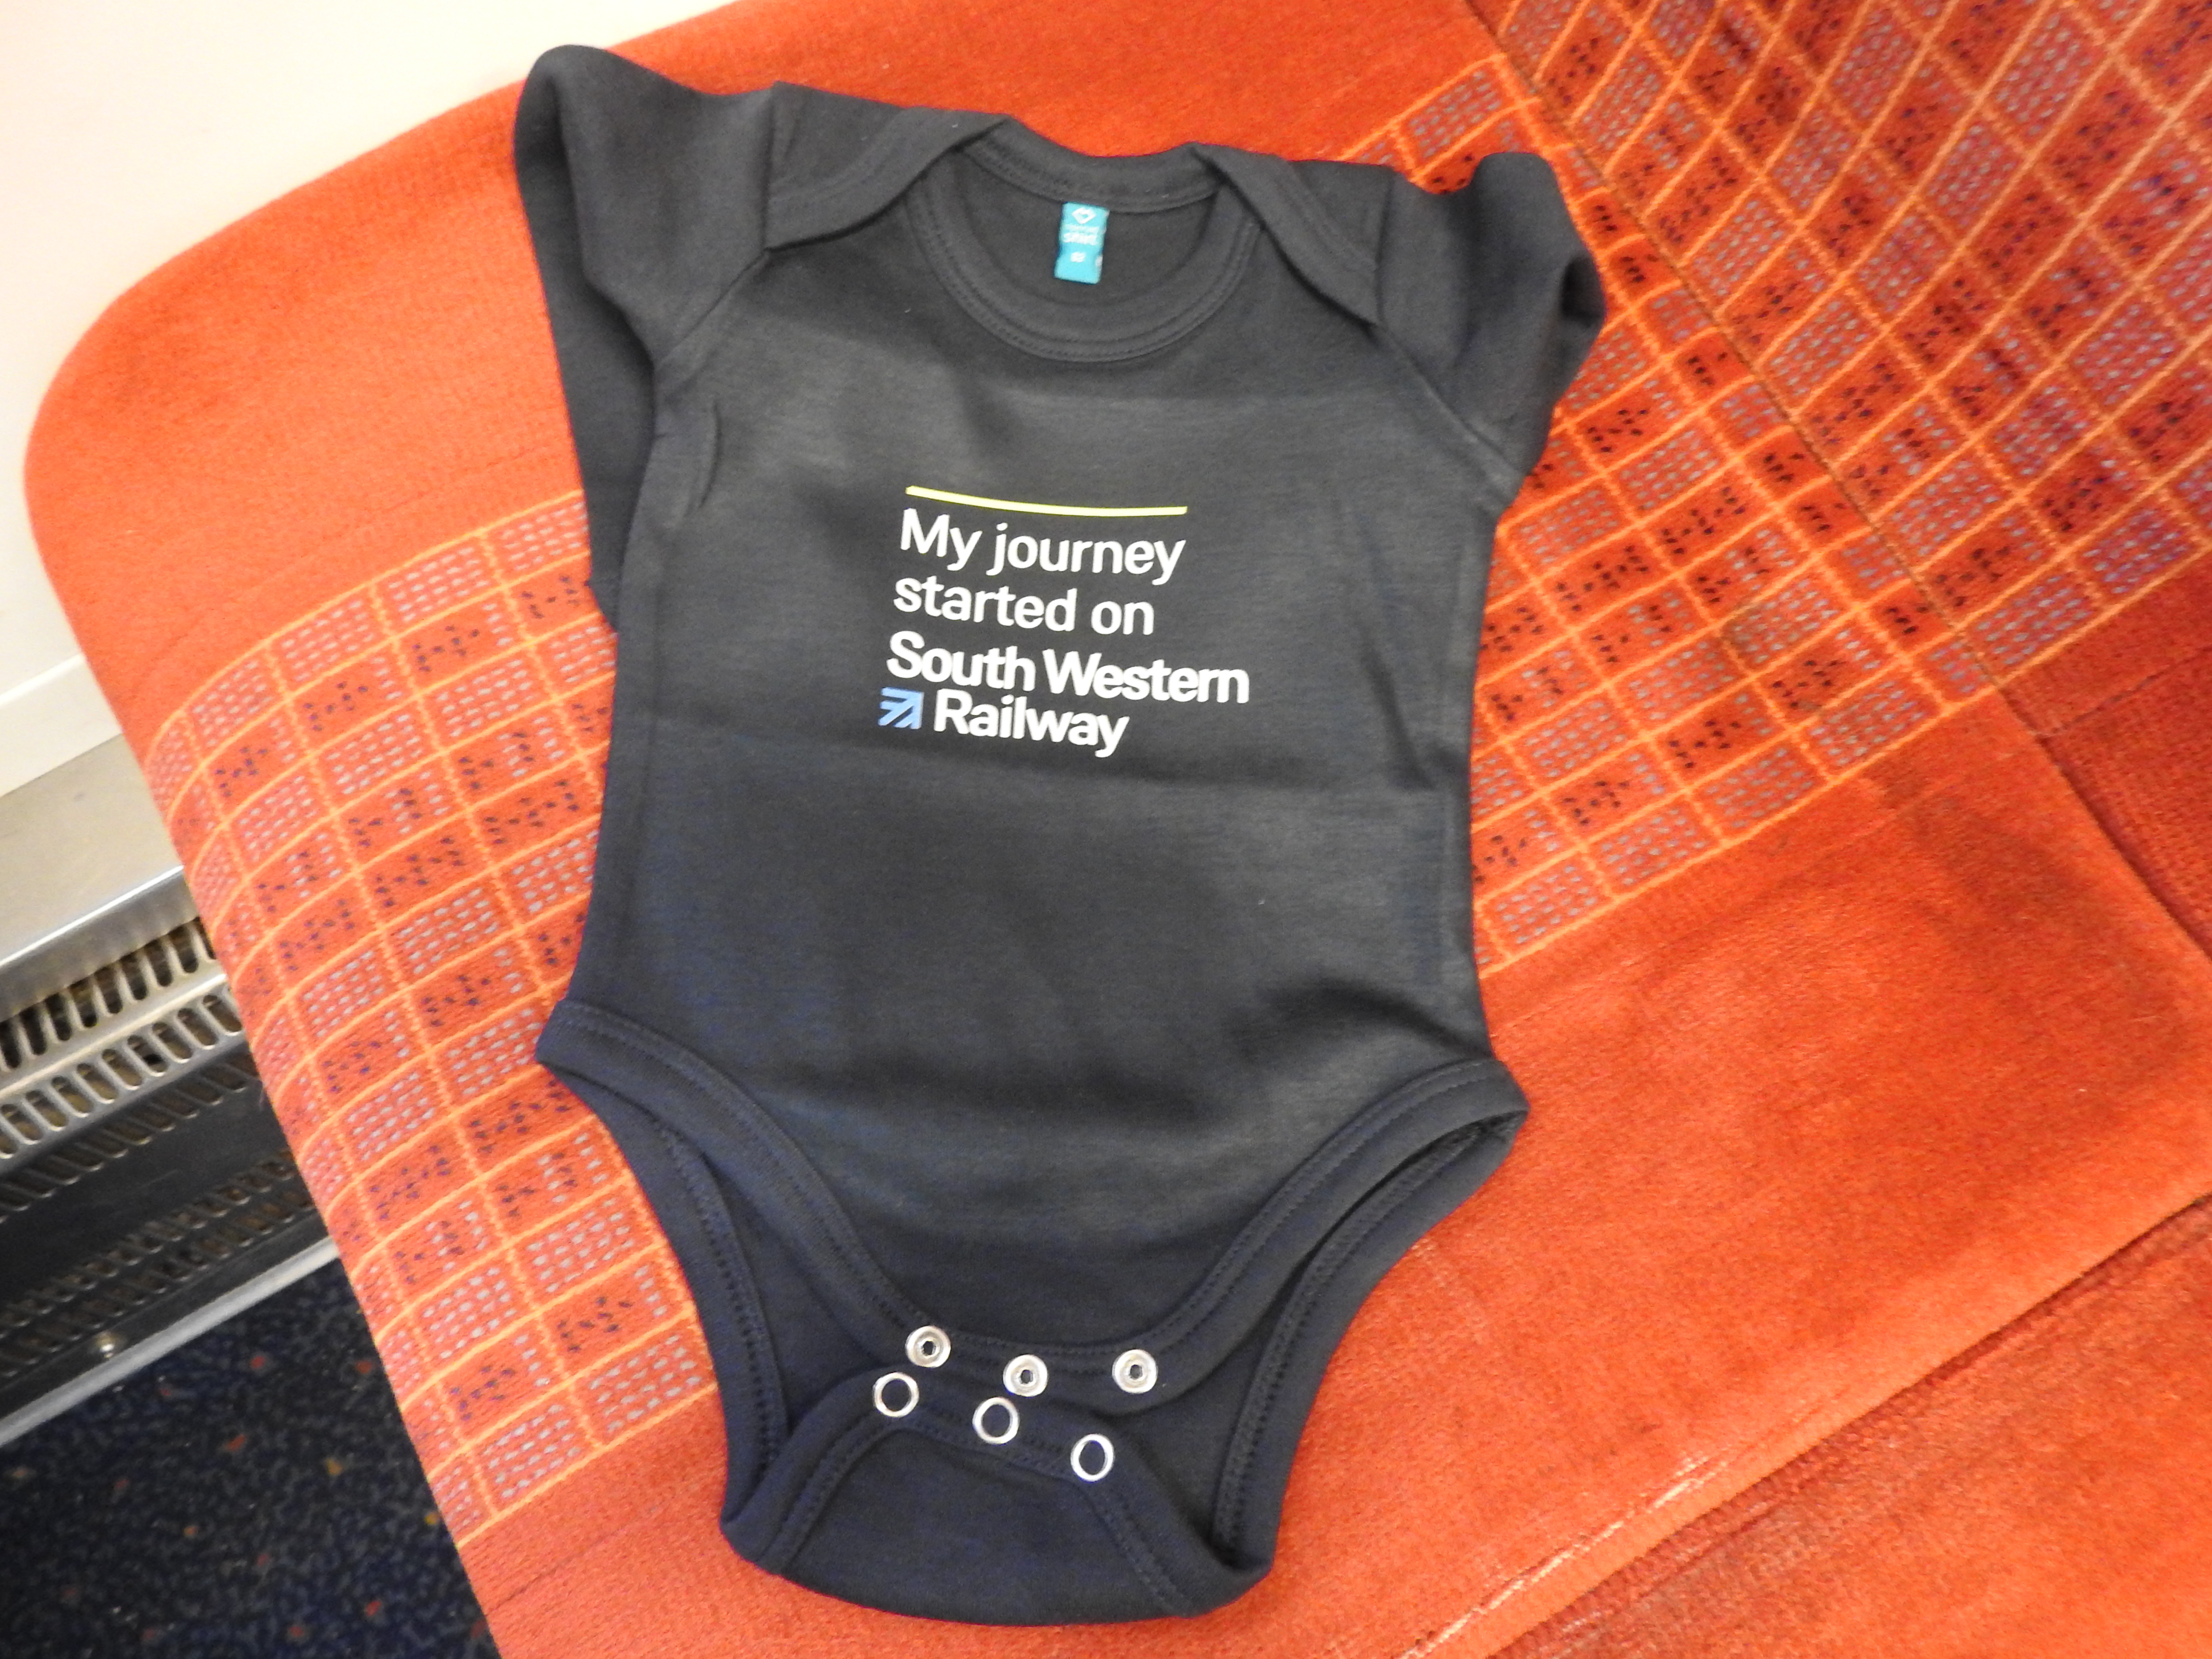 SWR branded baby clothing